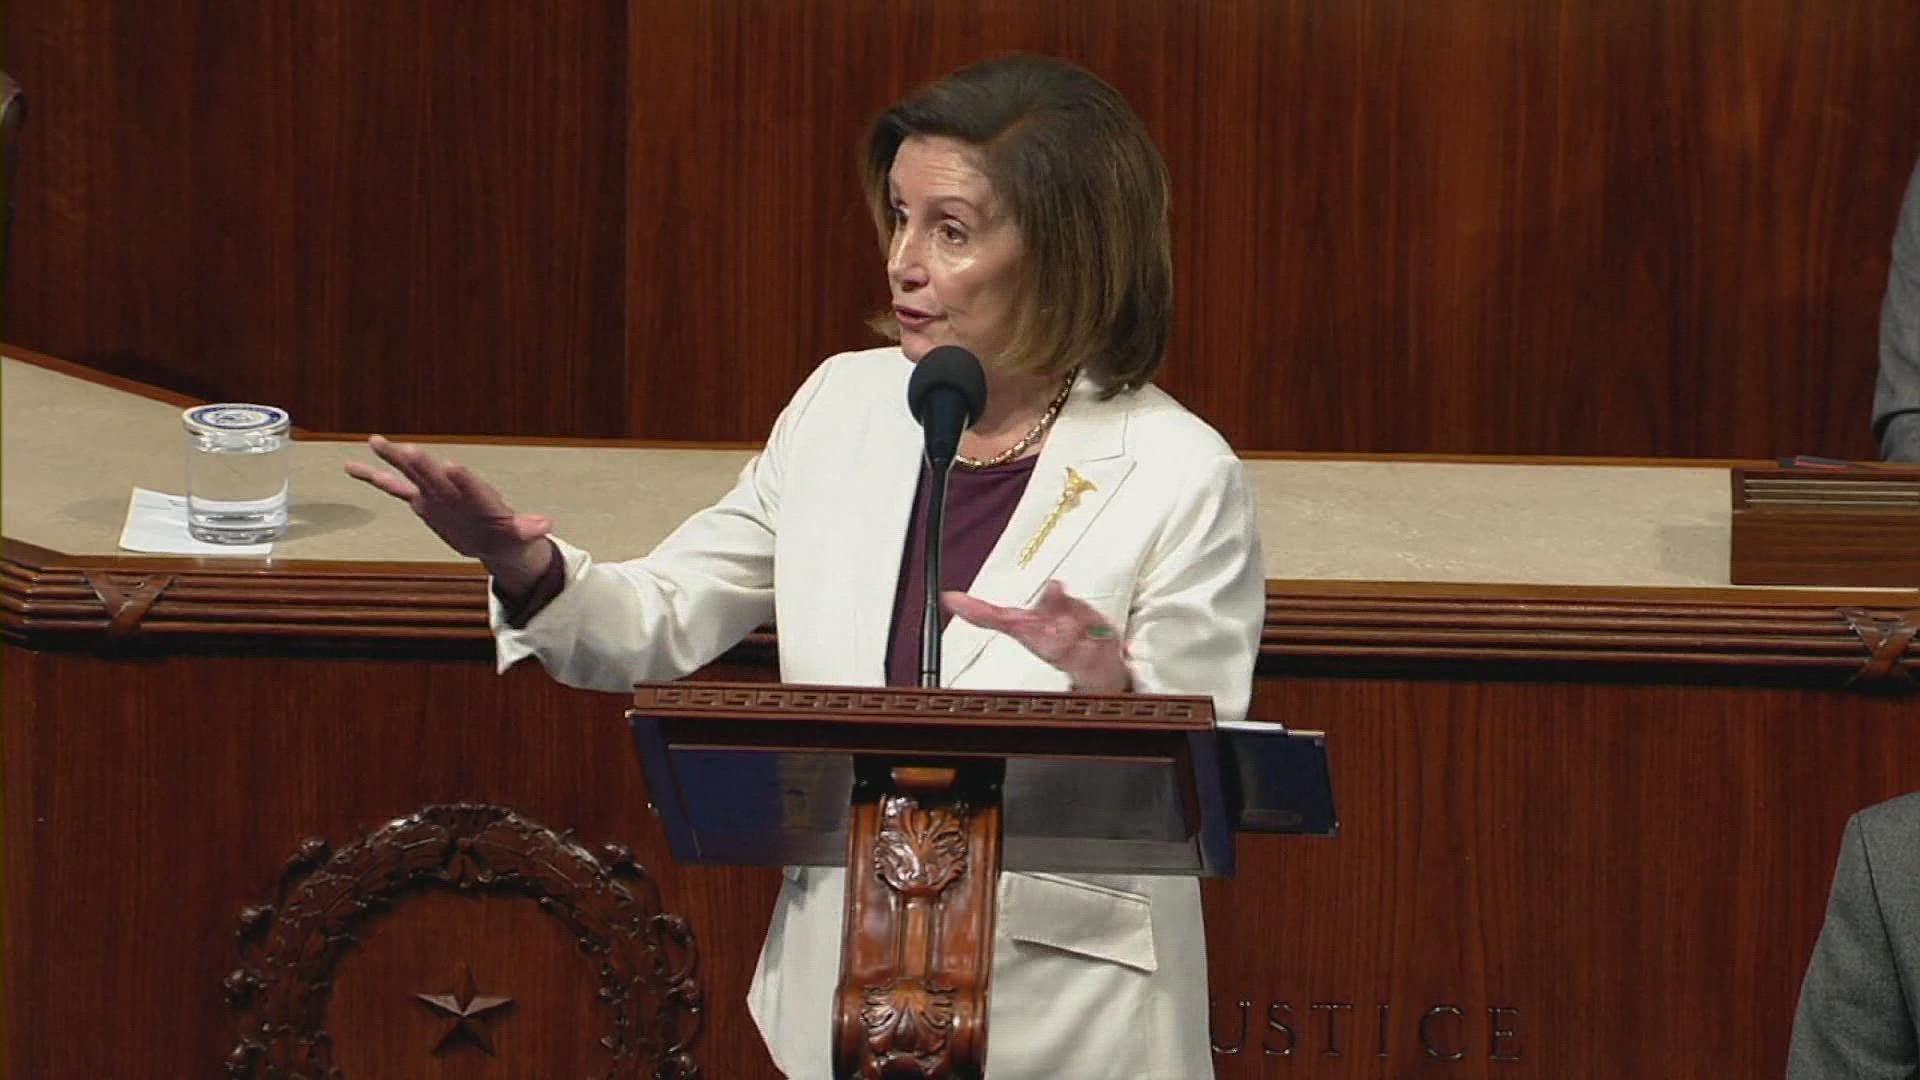 "For me, the hour has come for a new generation to lead the Democratic caucus that I so deeply respect,” Pelosi said in her speech on the House floor.